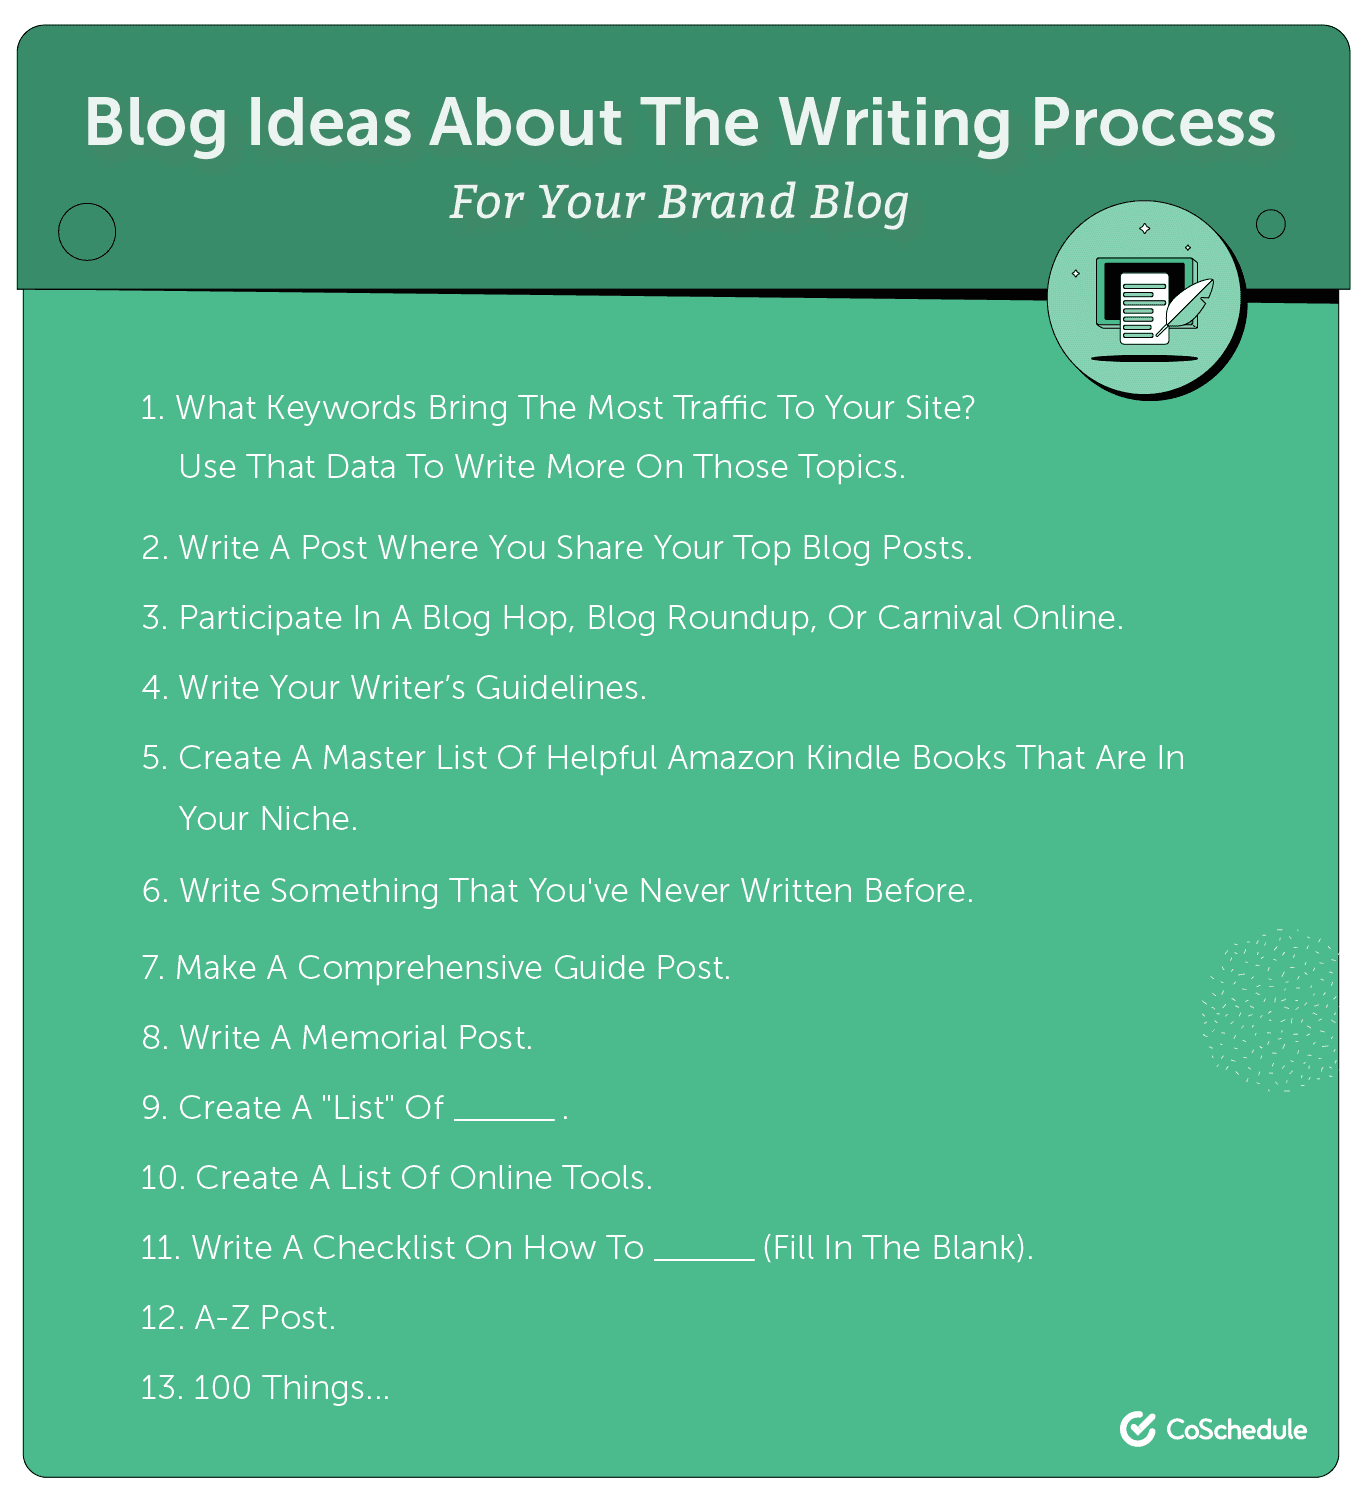 Blog ideas about the writing process.